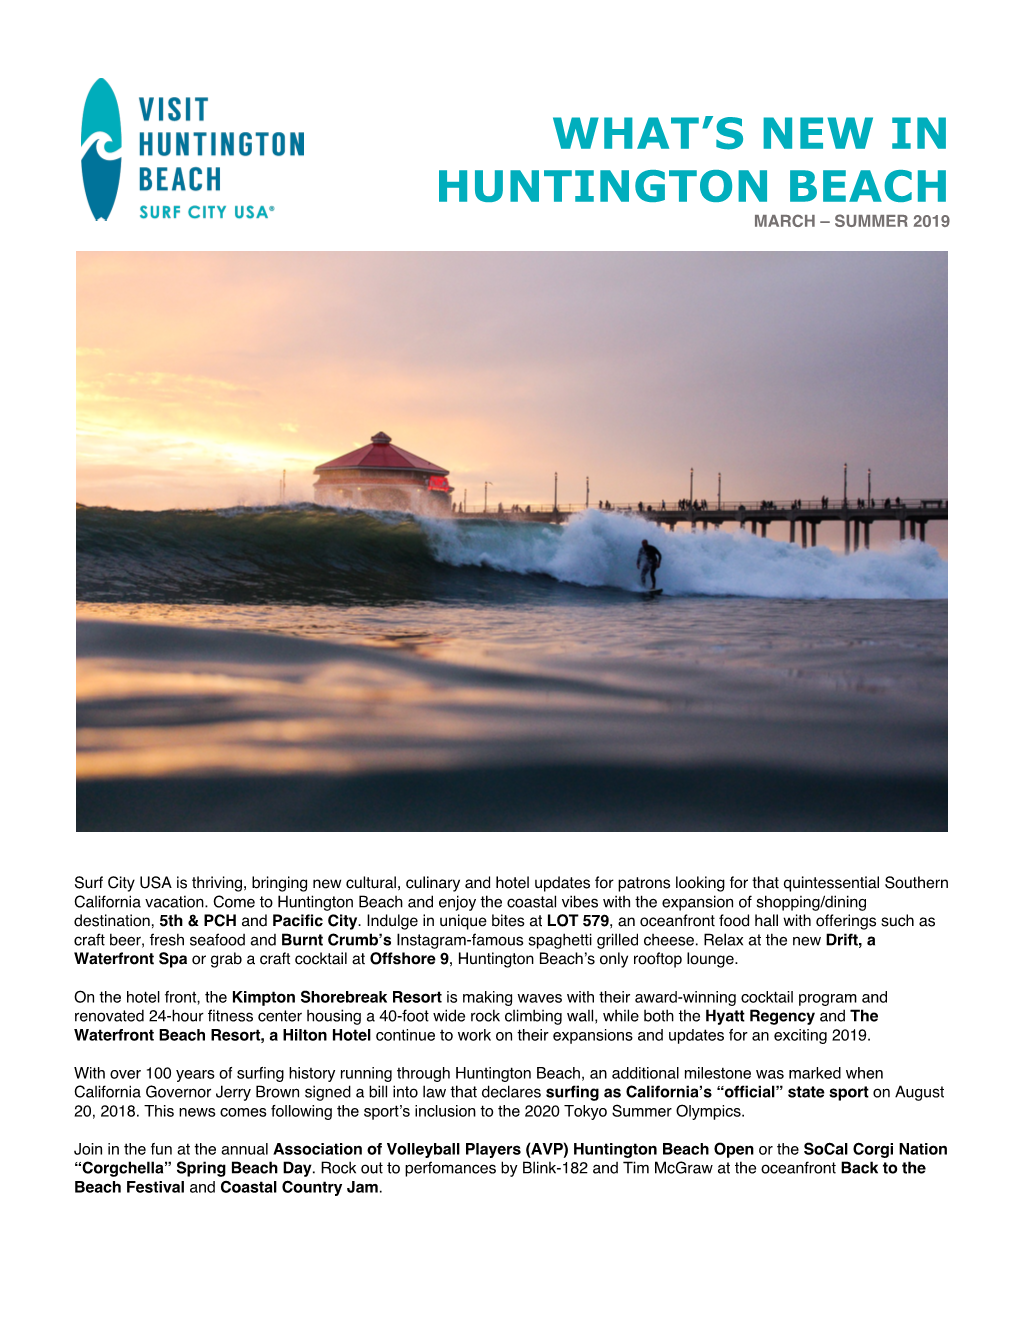 What's New in Huntington Beach